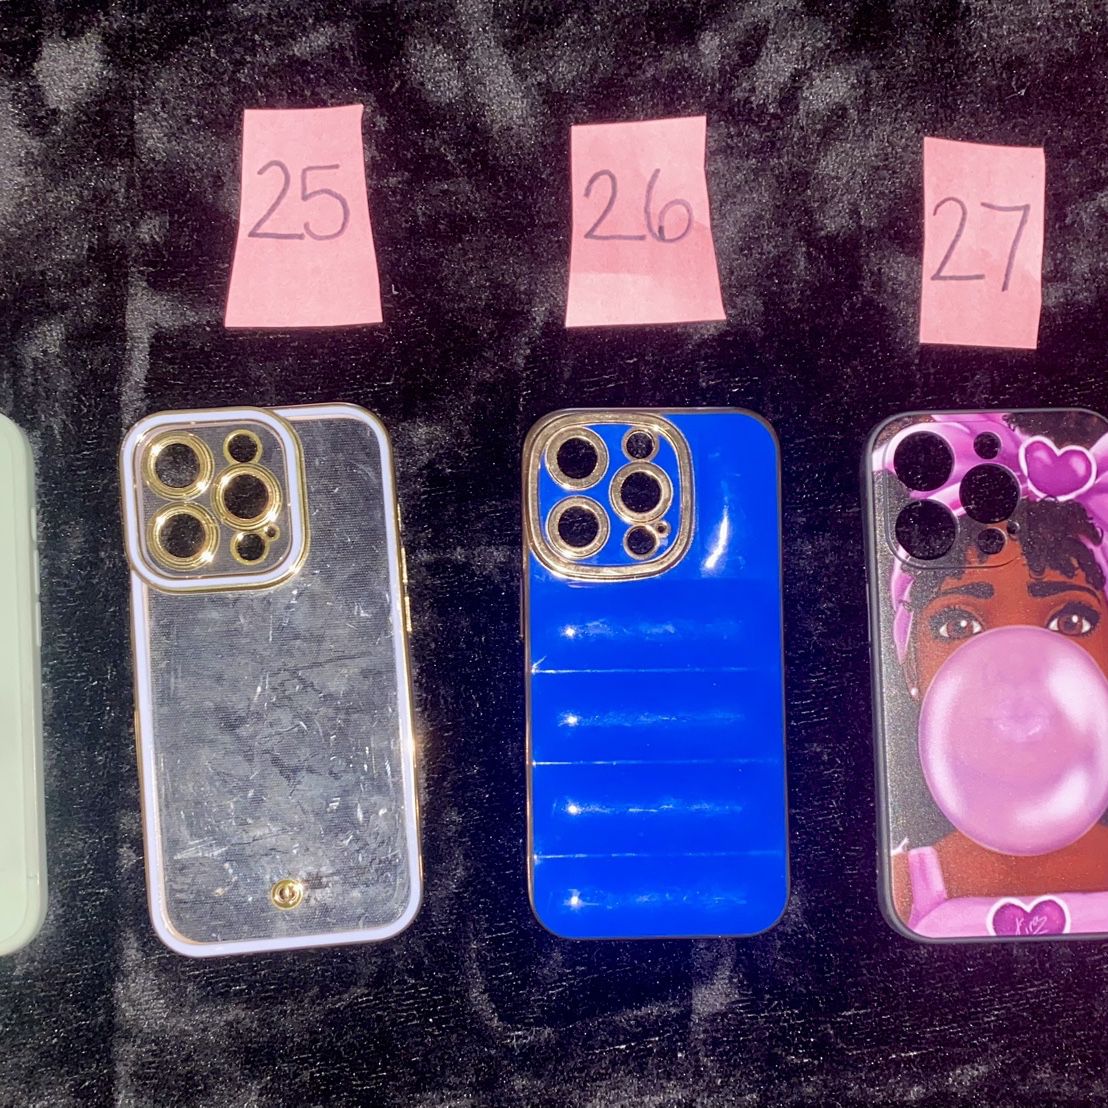 iPhone Case For iPhones 10, 12, & 13